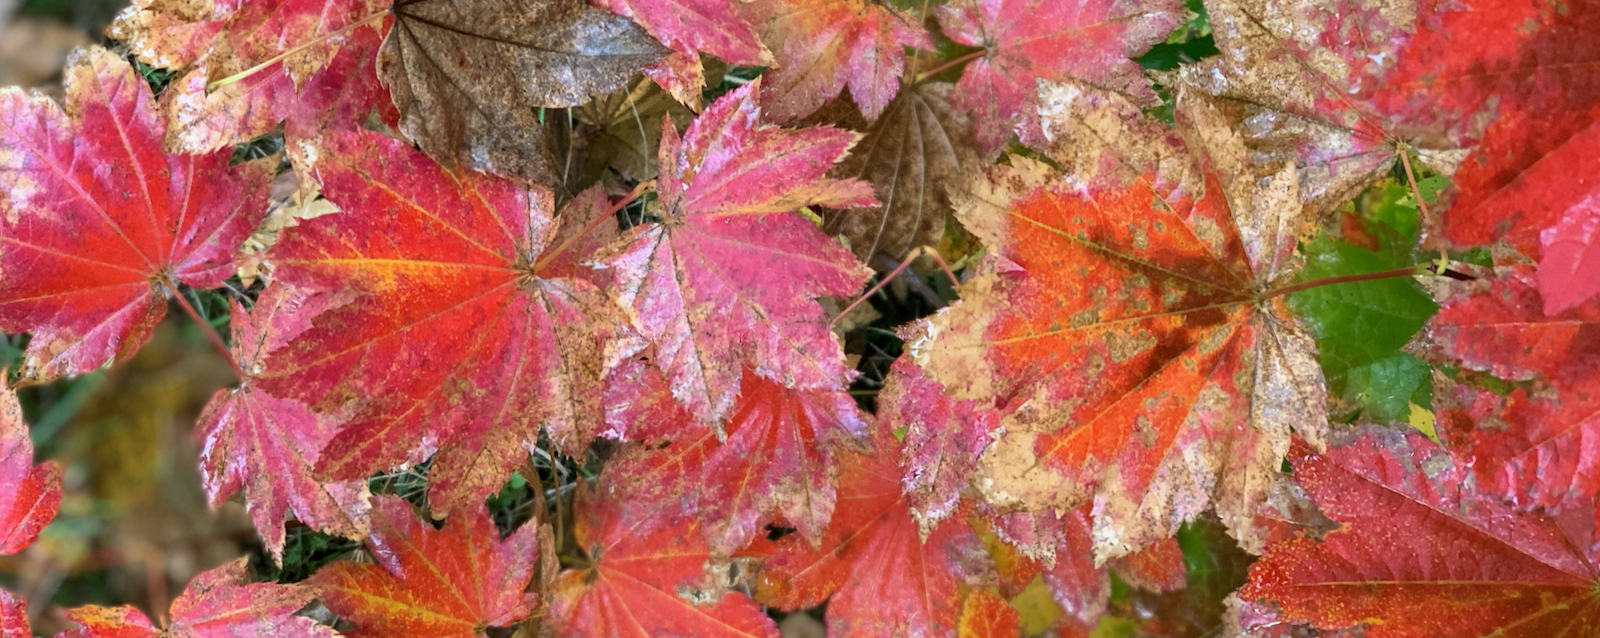 Wet fall leaves, red with gold edges.